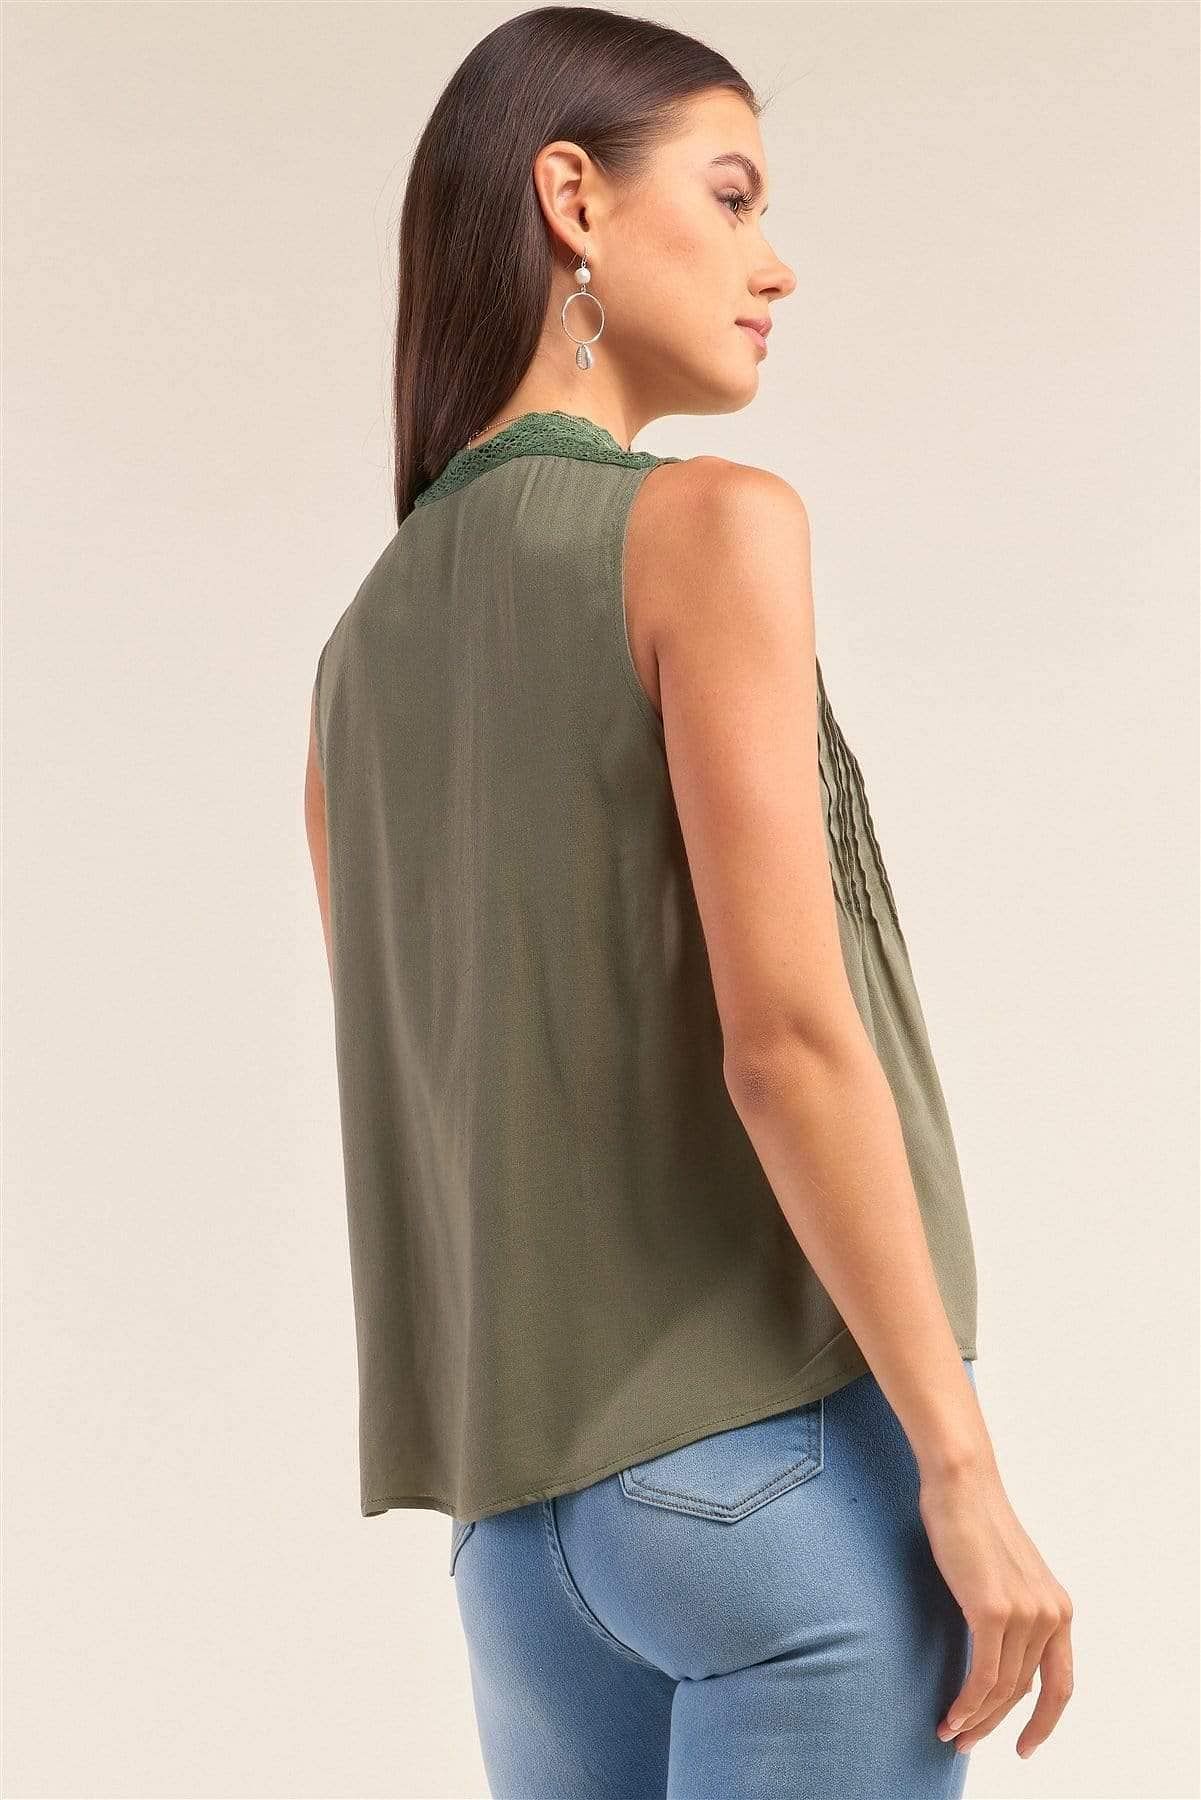 Green Sleeveless Crochet Embroidered Top - Shopping Therapy S Top